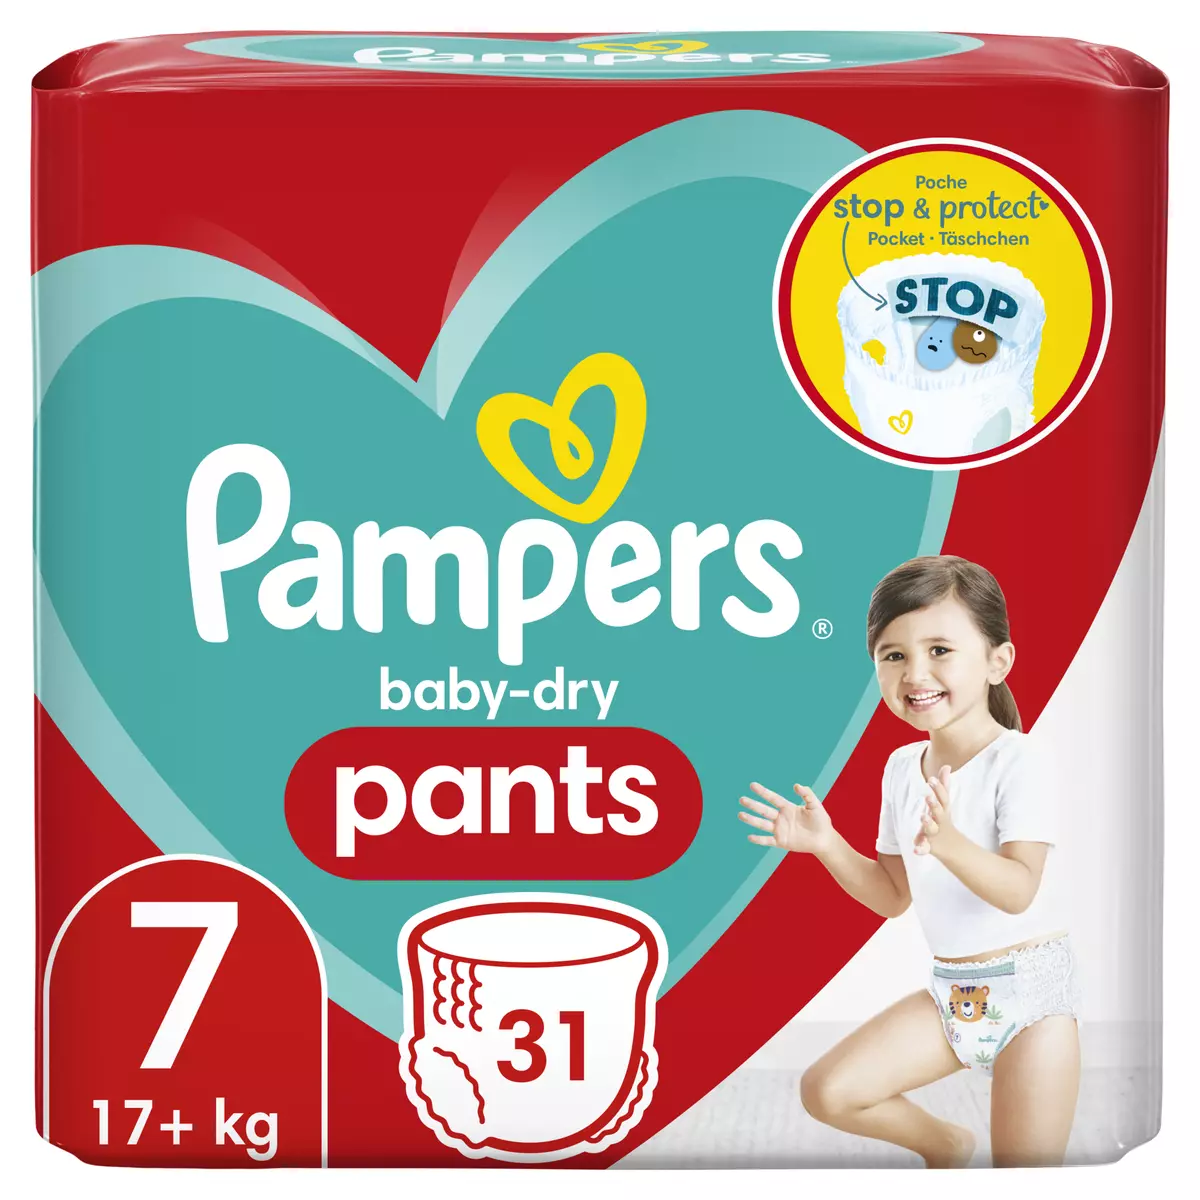 Pampers Baby-Dry taille 7 boîte mensuelle 132 couches